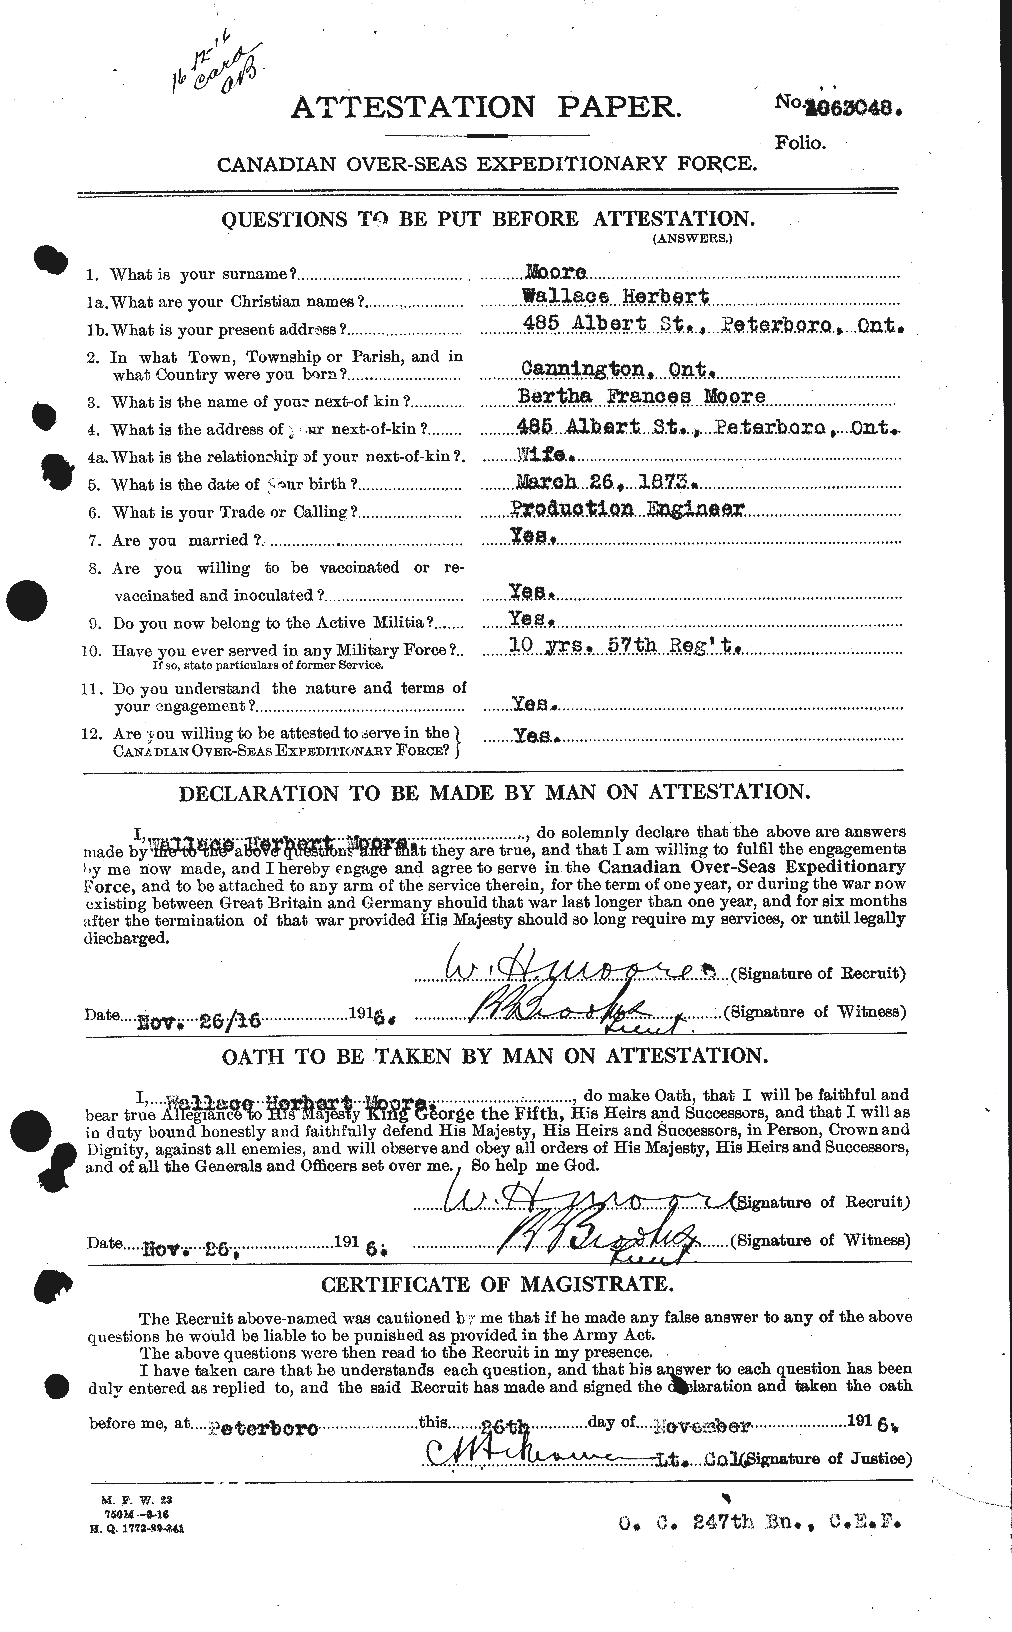 Personnel Records of the First World War - CEF 505685a